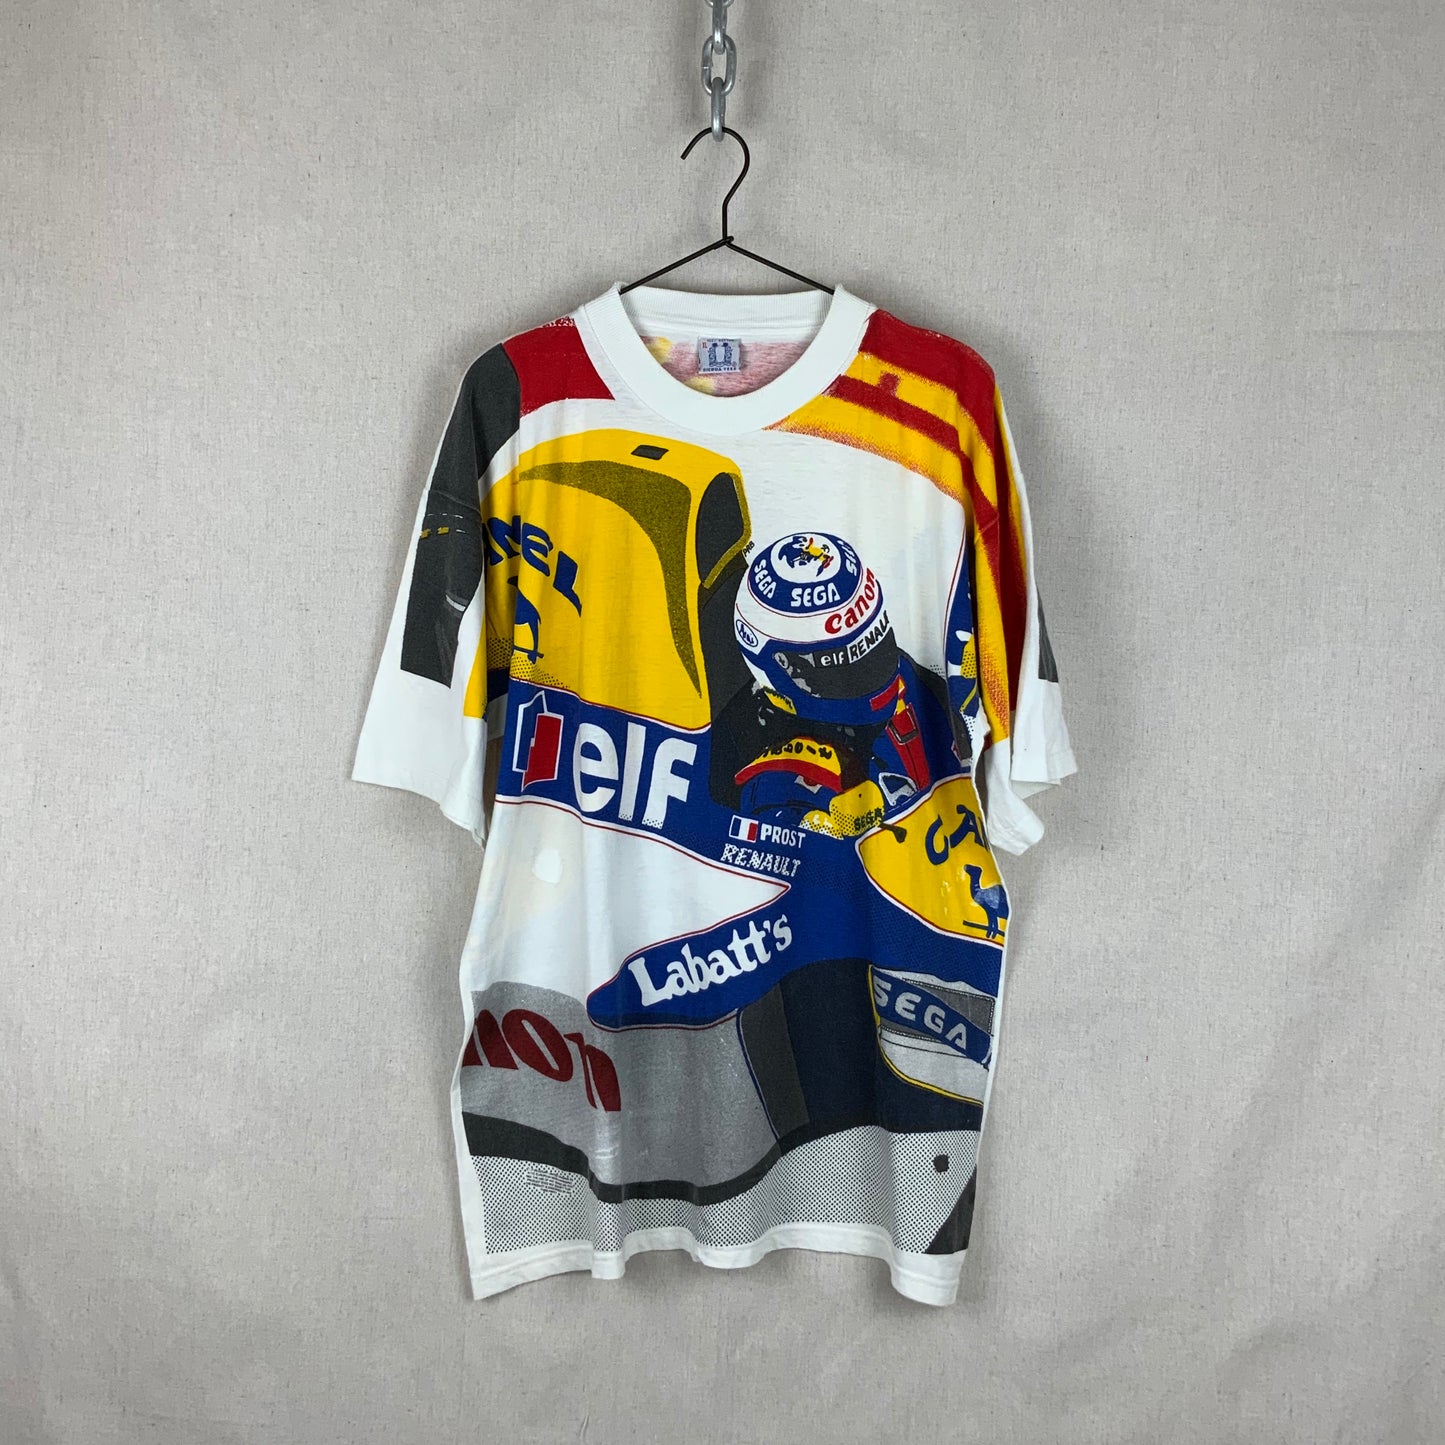 F1 Alain Prost Top (all over print) 90’s